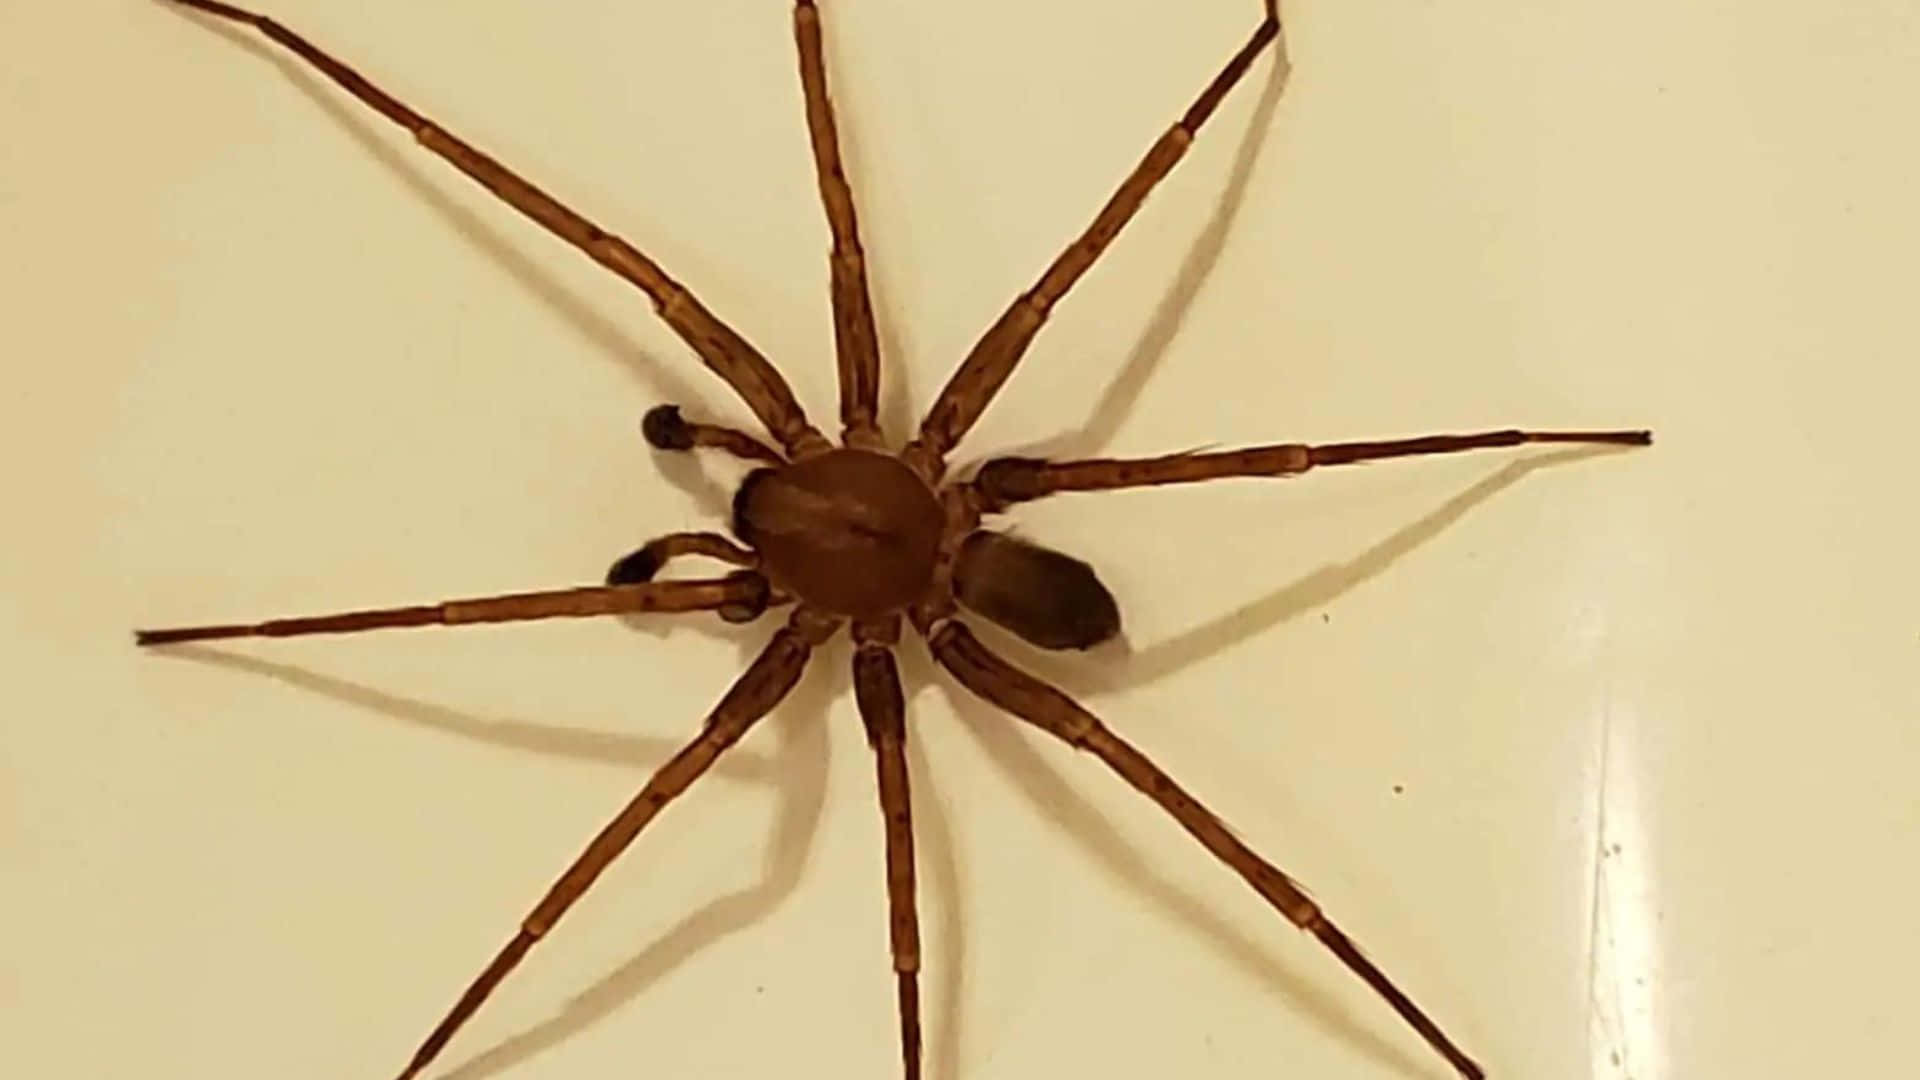 A close-up view of a Brown Recluse Spider on a leaf Wallpaper